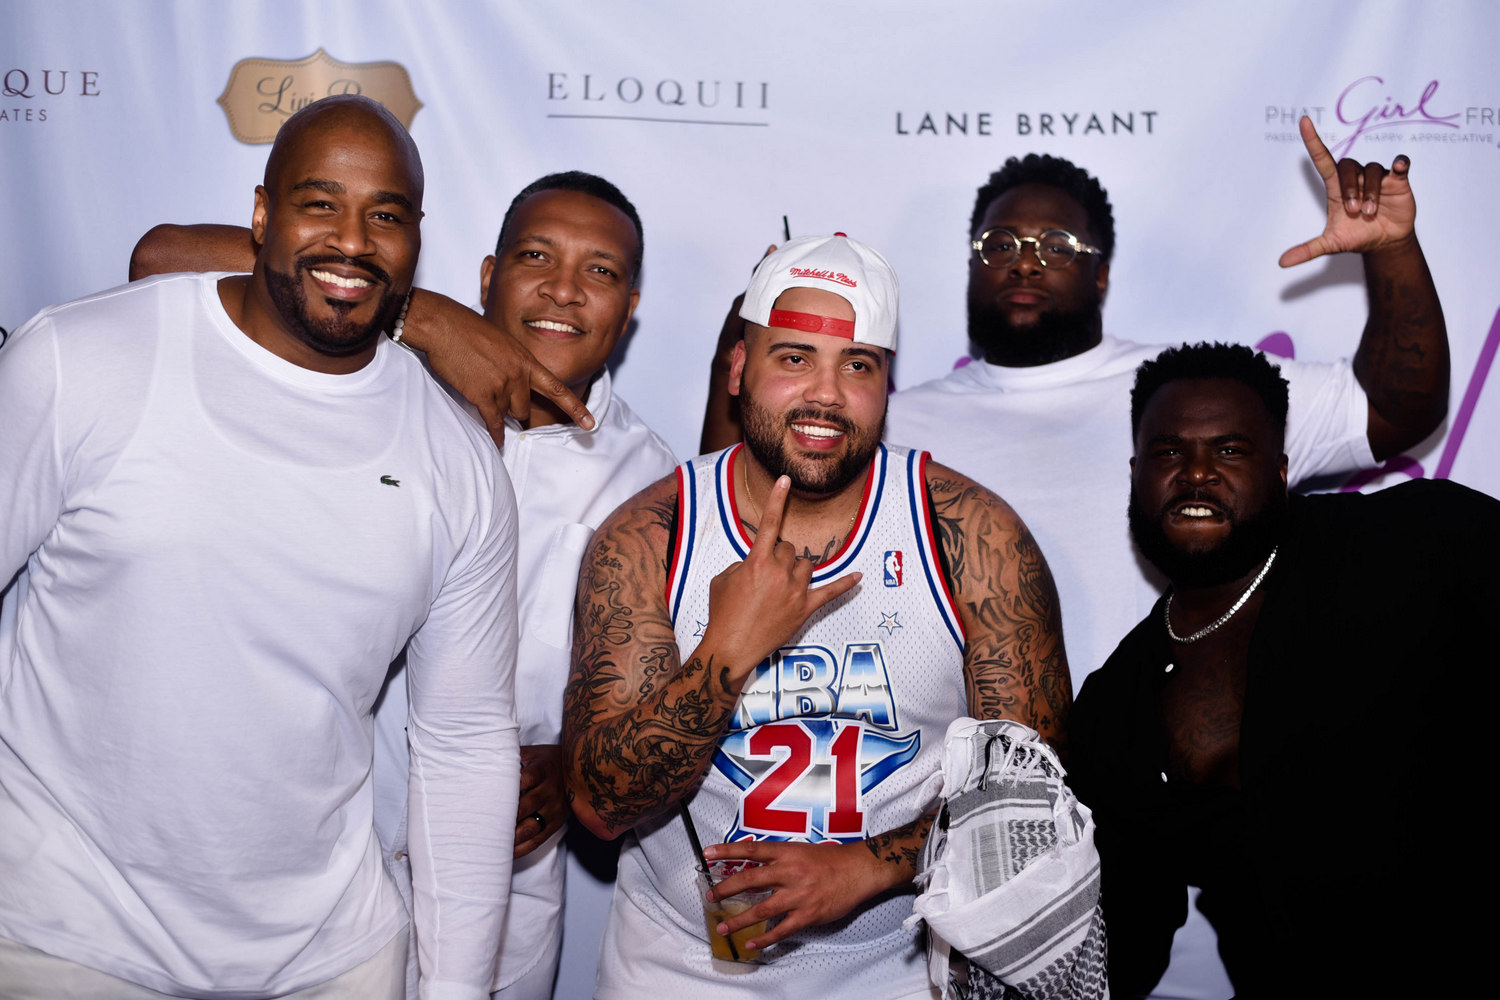 6th Annual Lifestyled Honors shot by XLShoots